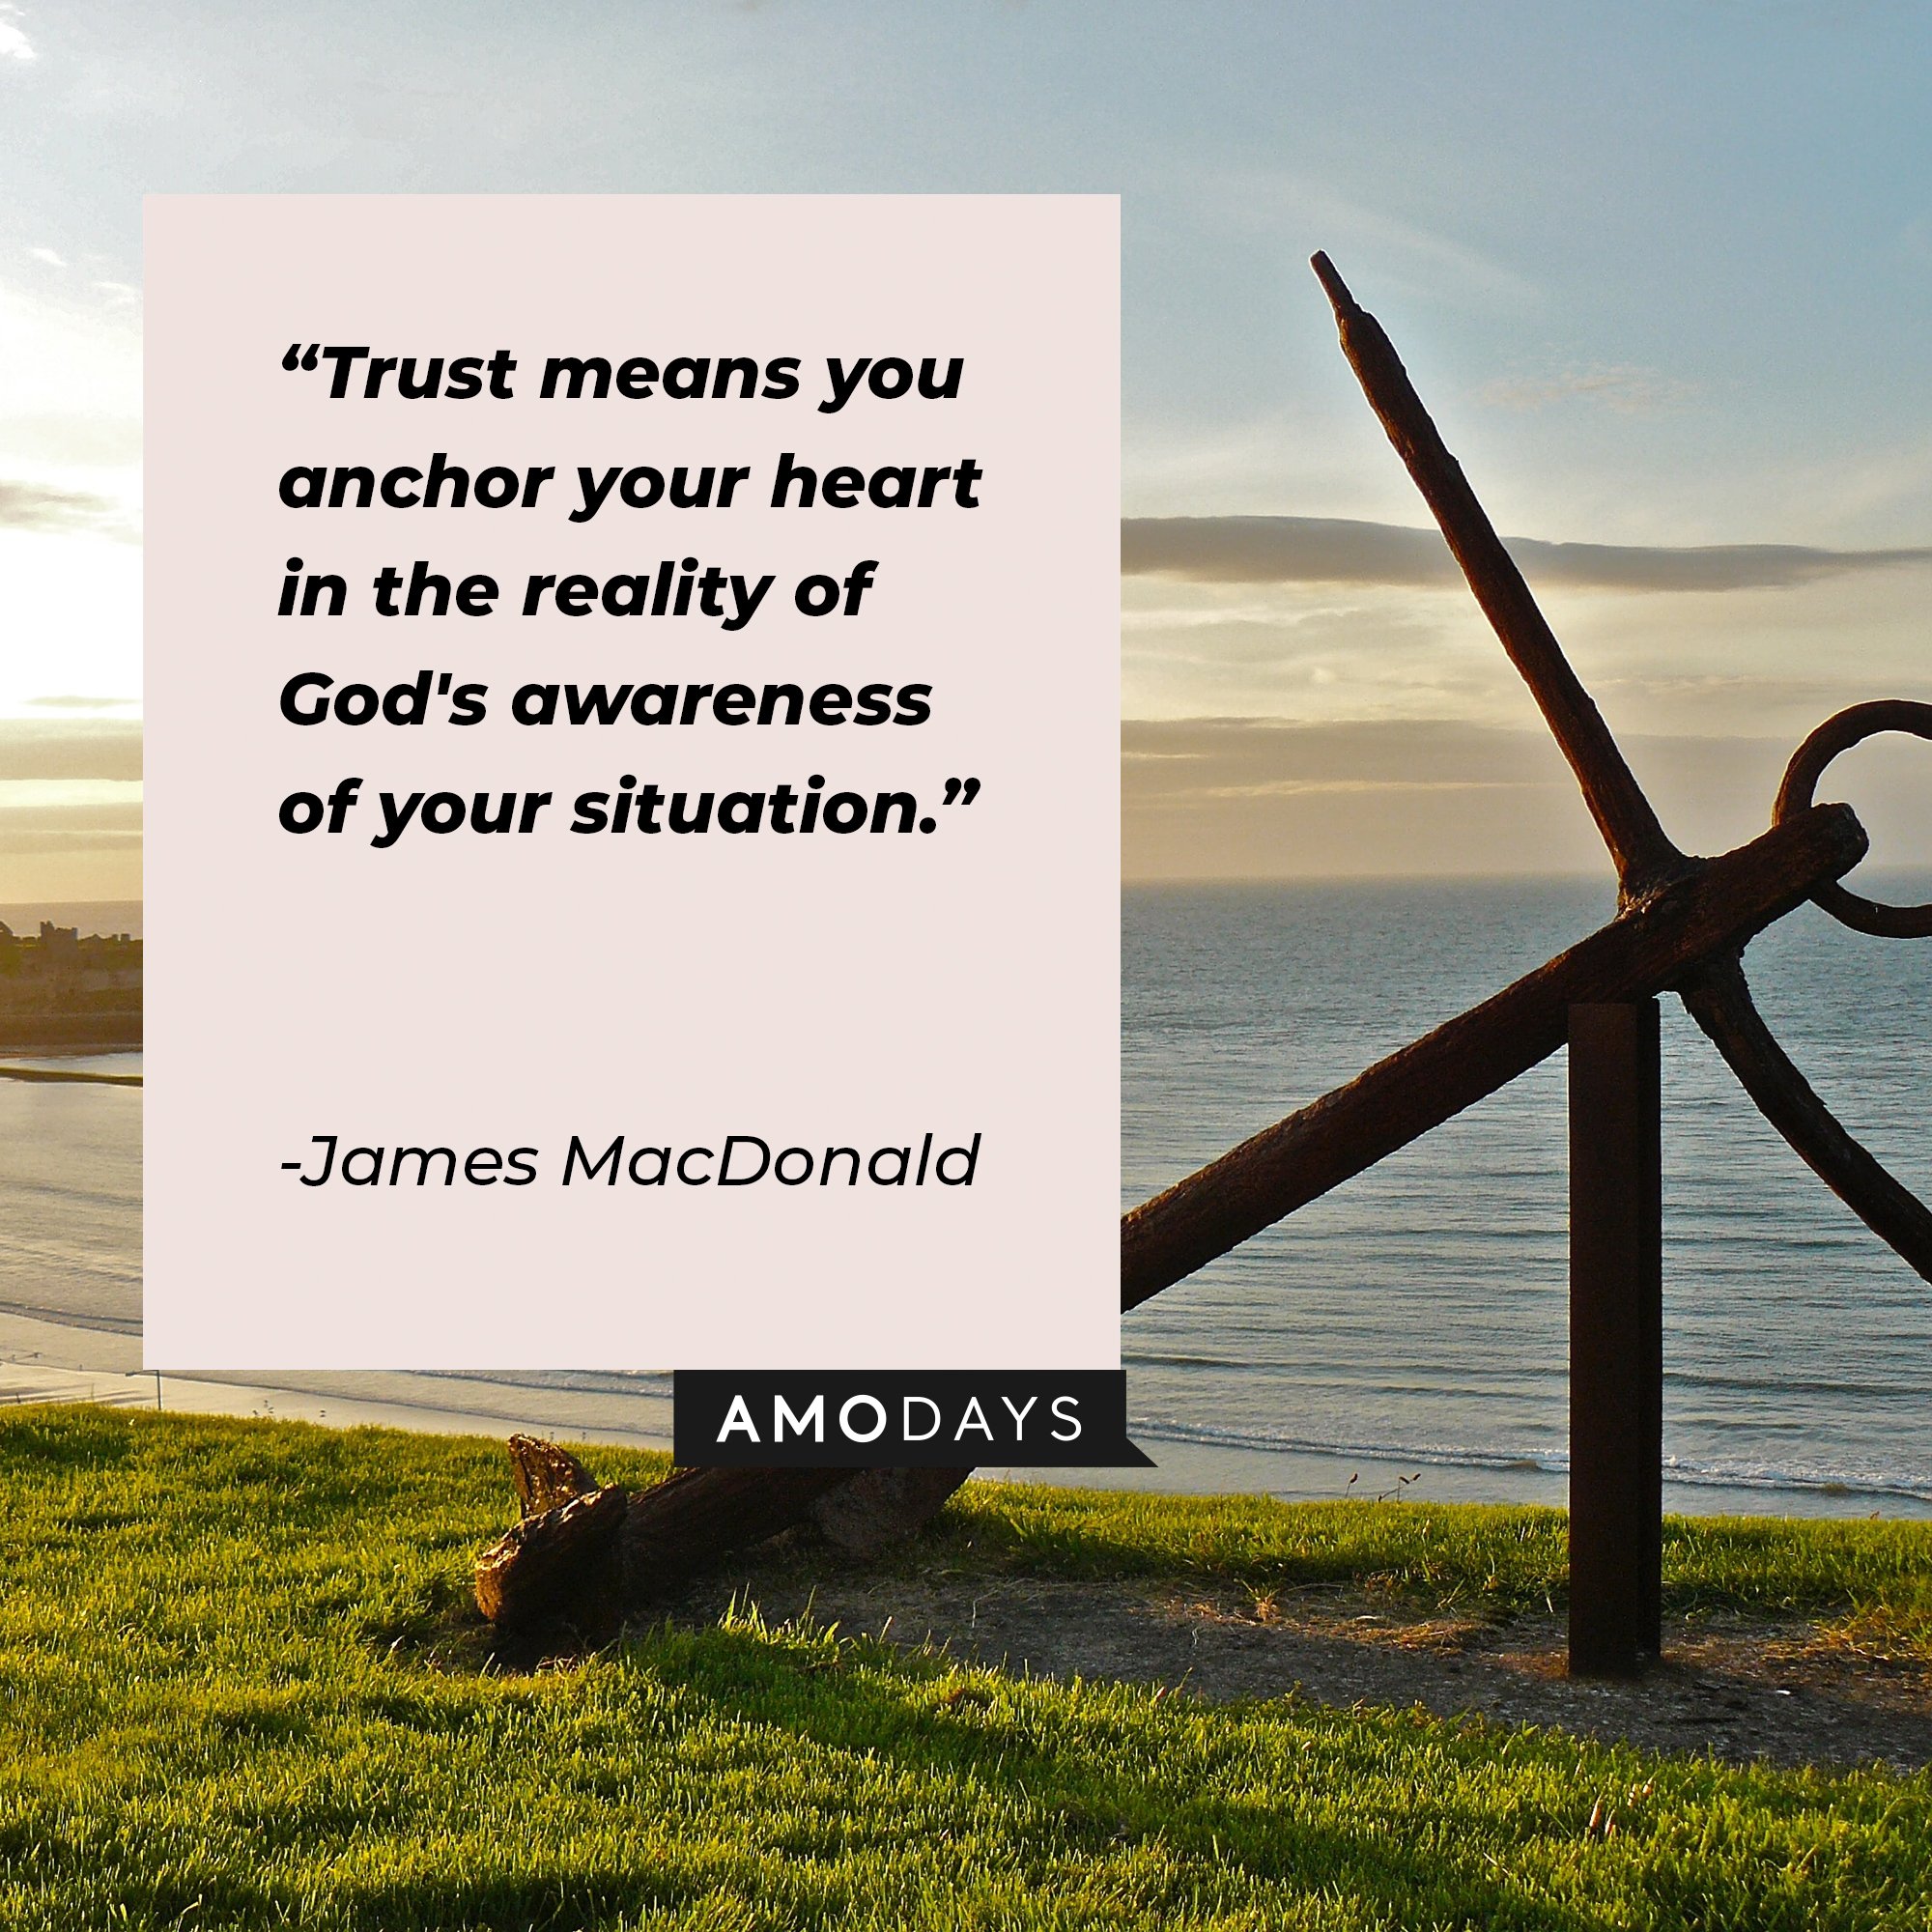 James MacDonald's quote: "Trust means you anchor your heart in the reality of God's awareness of your situation." | Image: AmoDays